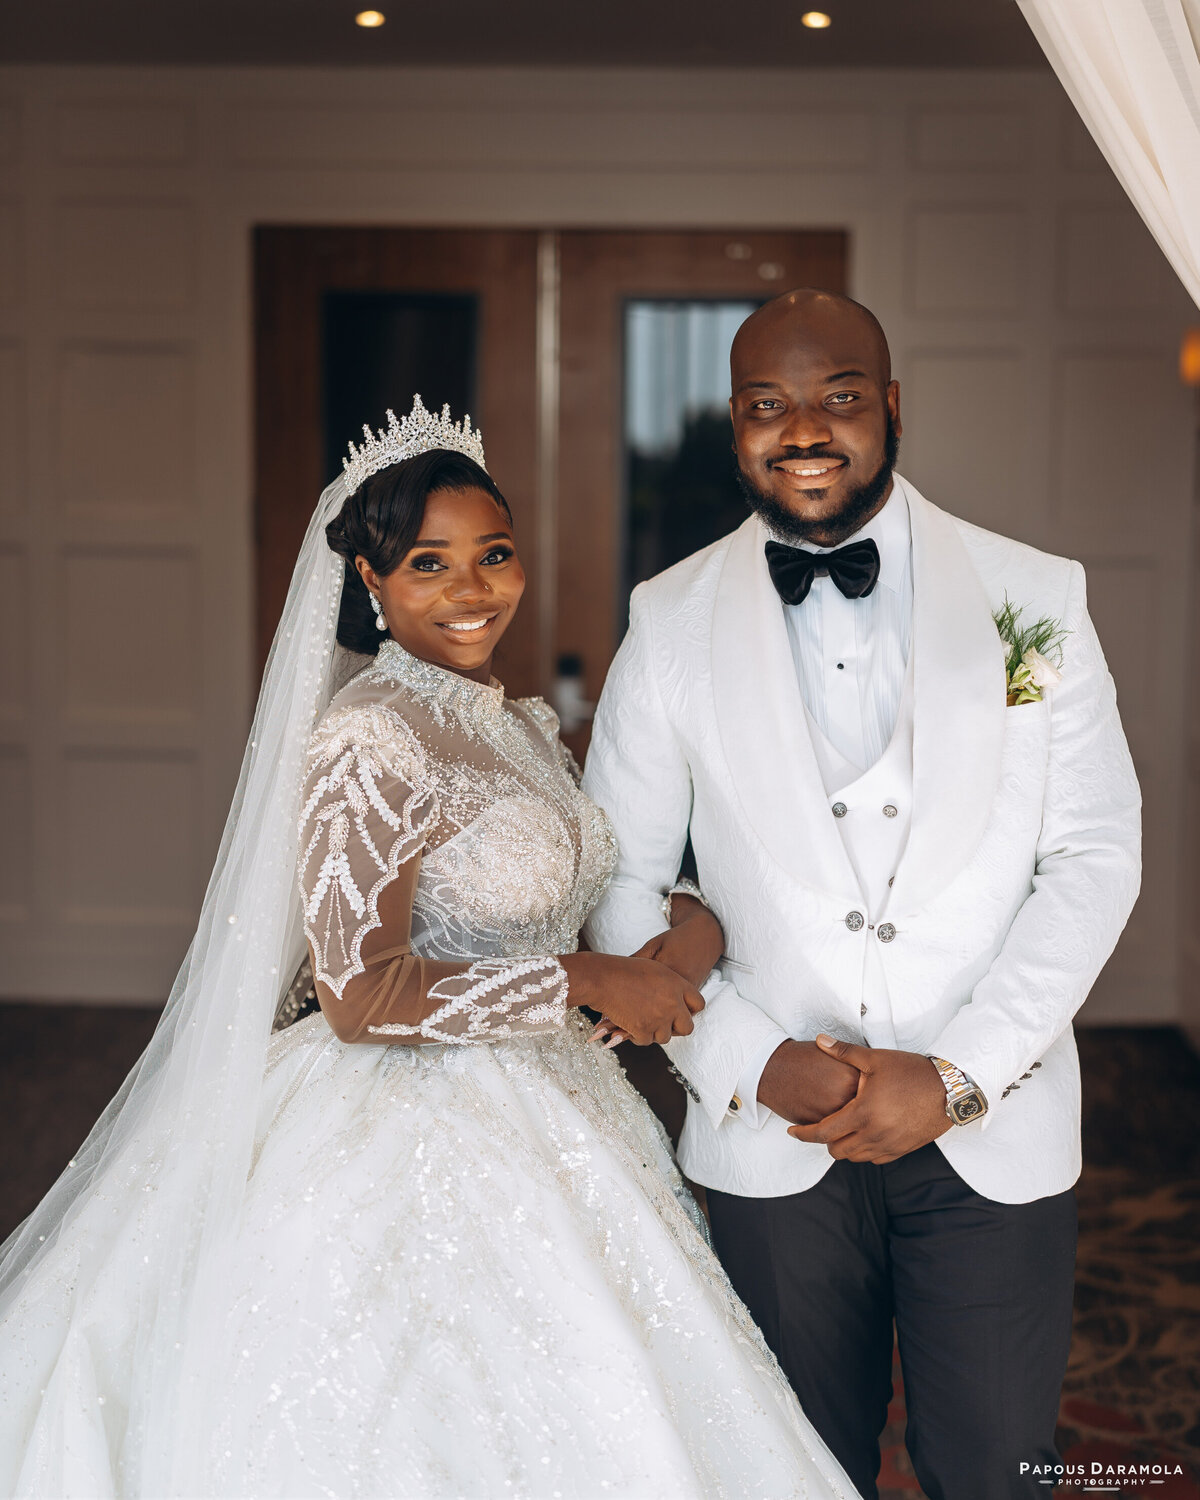 Abigail and Abije Oruka Events Papouse photographer Wedding event planners Toronto planner African Nigerian Eyitayo Dada Dara Ayoola outdoor ceremony floral princess ballgown rolls royce groom suit potraits  paradise banquet hall vaughn 148